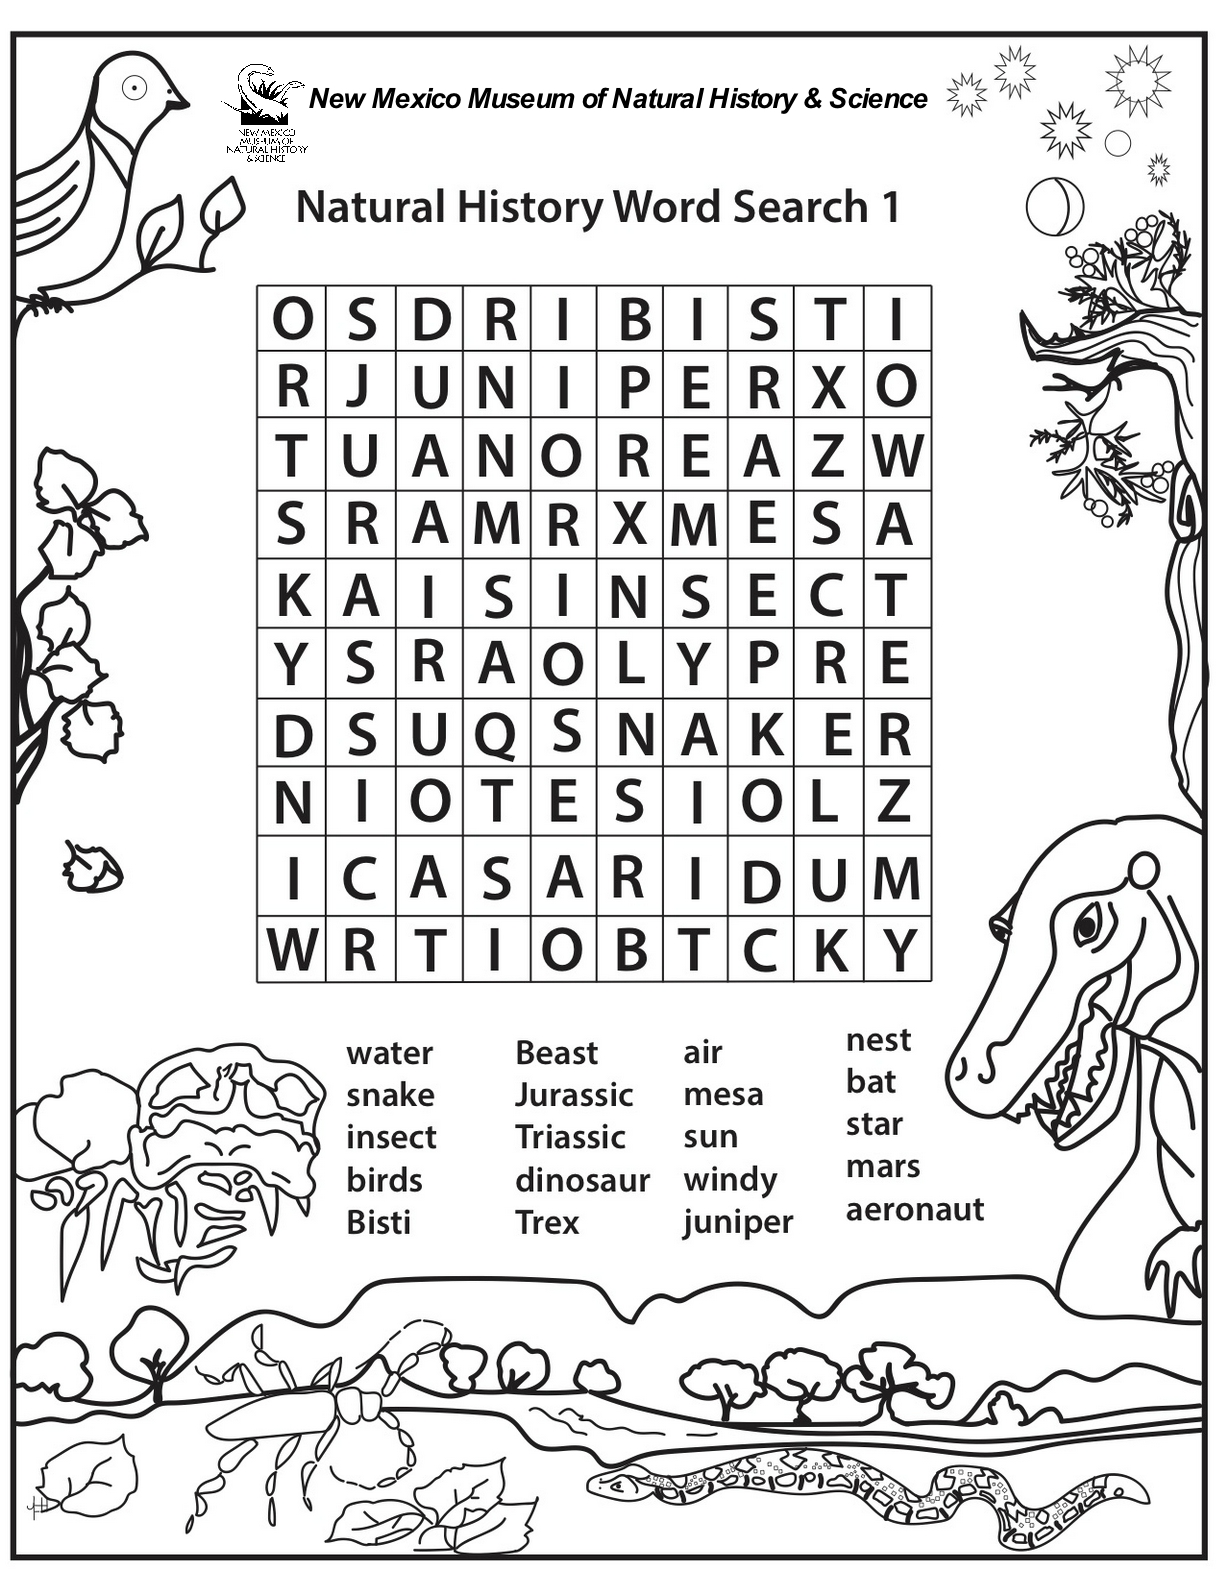 Natural History Word Search